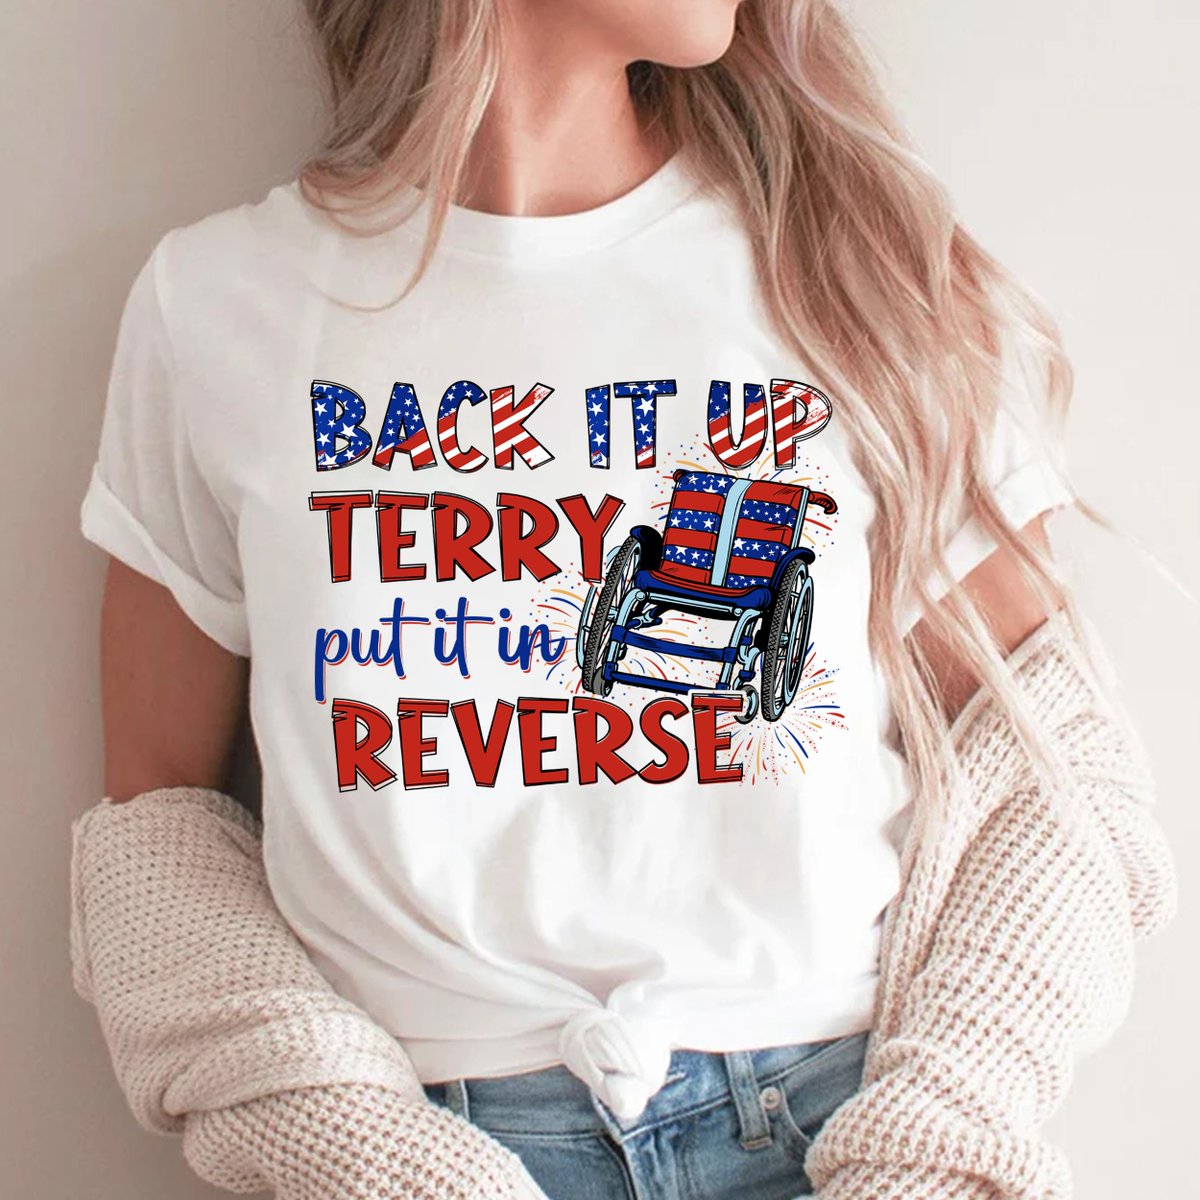 Excited to share the latest addition to my #etsy shop: Put It In Reverse Terry, Cute Funny July 4th shirt, Put It In Reverse Terry Shirt ,Back Up Terry, 4th of July Shirts, 4th of July, Merica etsy.me/430h8K2 #4thofjulyshirt #patrioticshirt #americanshirt #meri